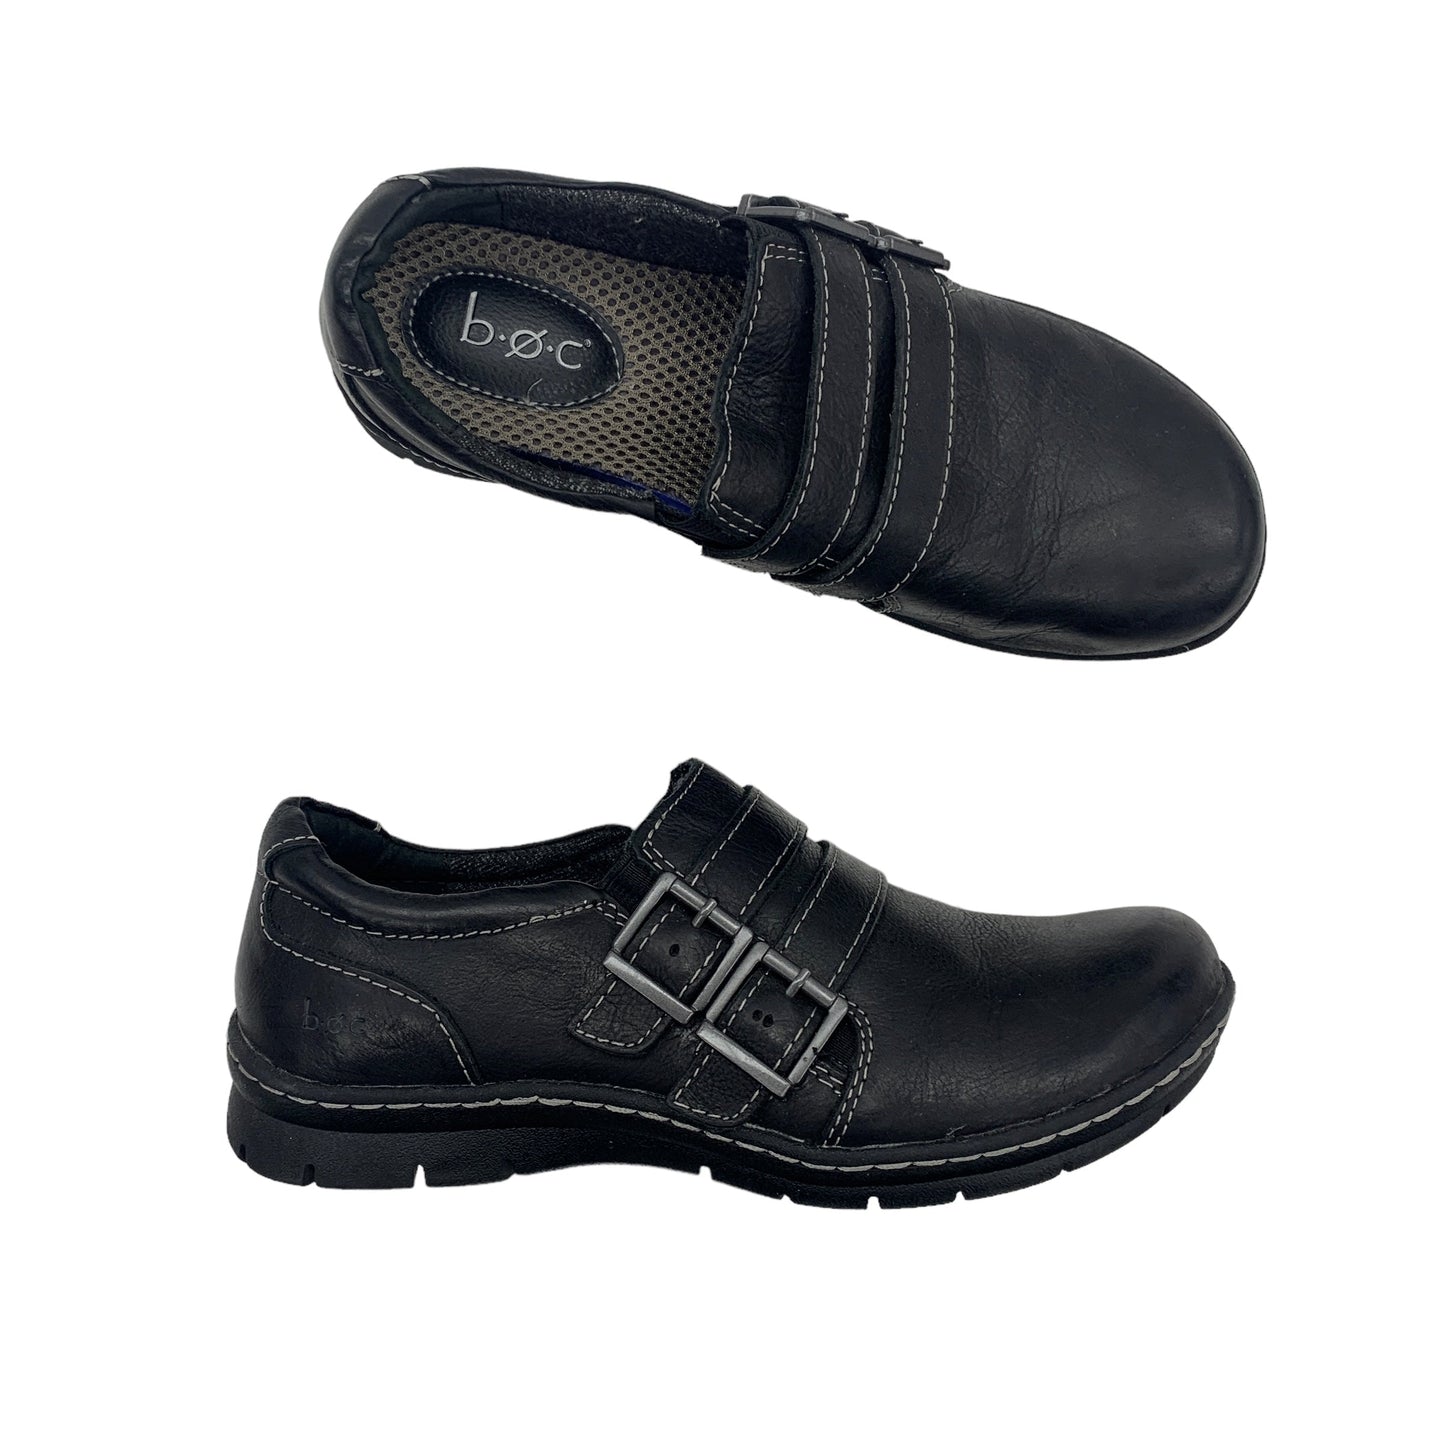 Shoes Flats Loafer Oxford By Boc  Size: 6